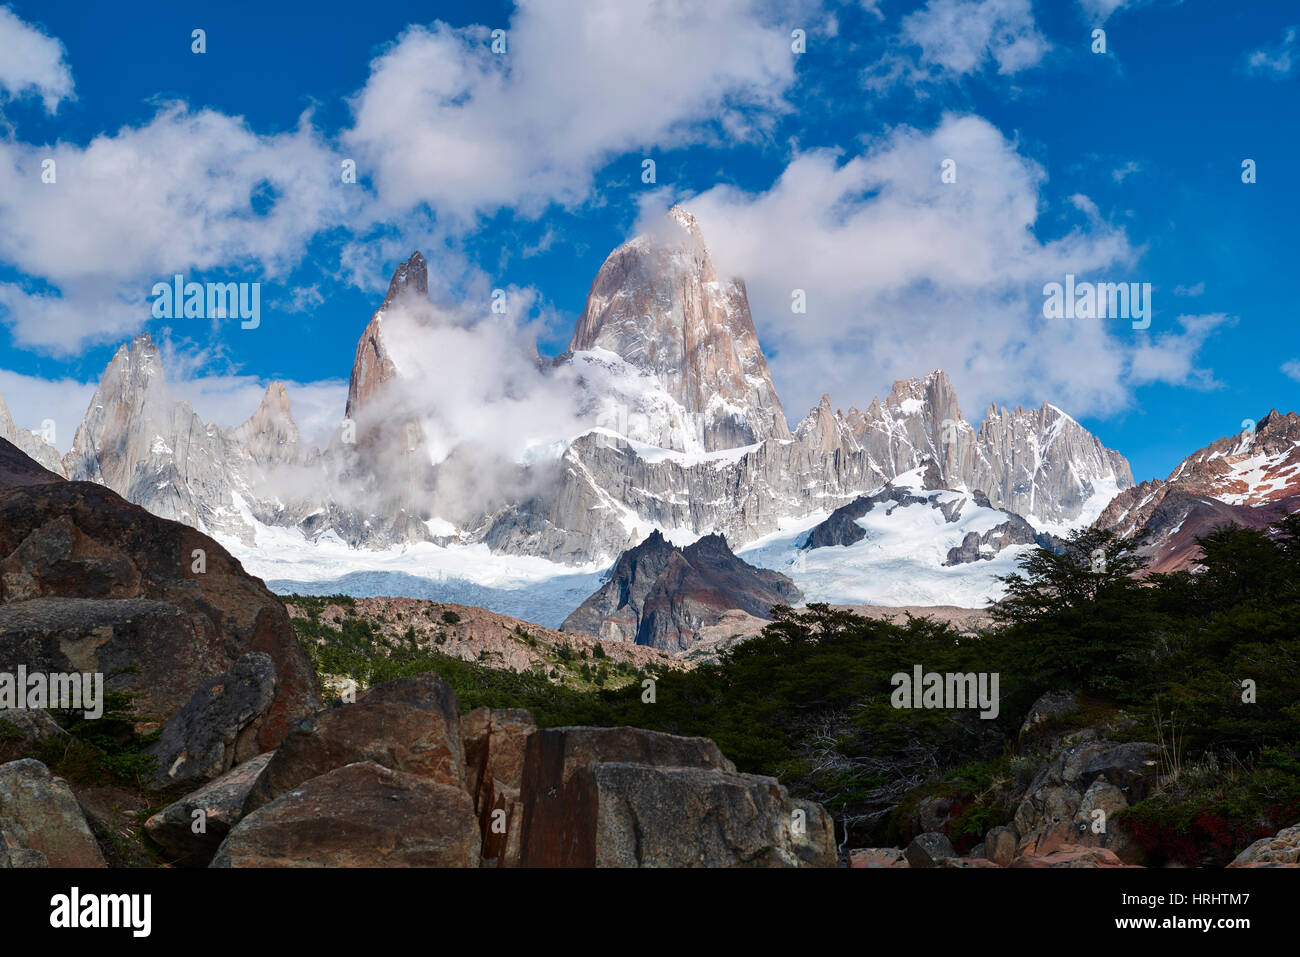 Monte Fitz Roy framed by rocks and trees near Arroyo del Salto in Patagonia, Argentina Stock Photo